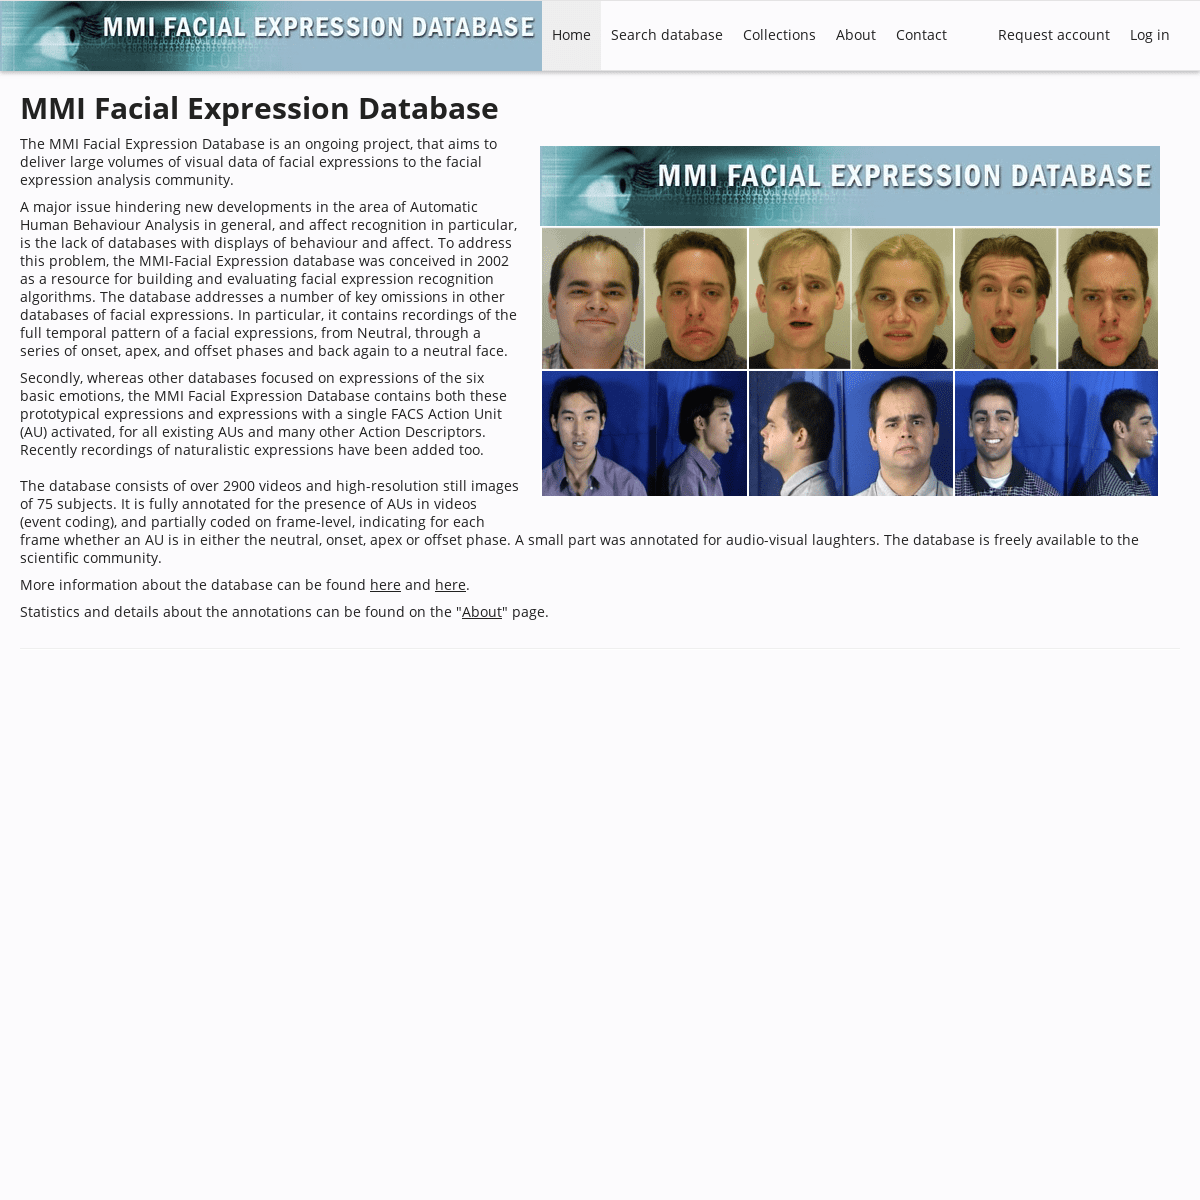 MMI Facial Expression Database - Home